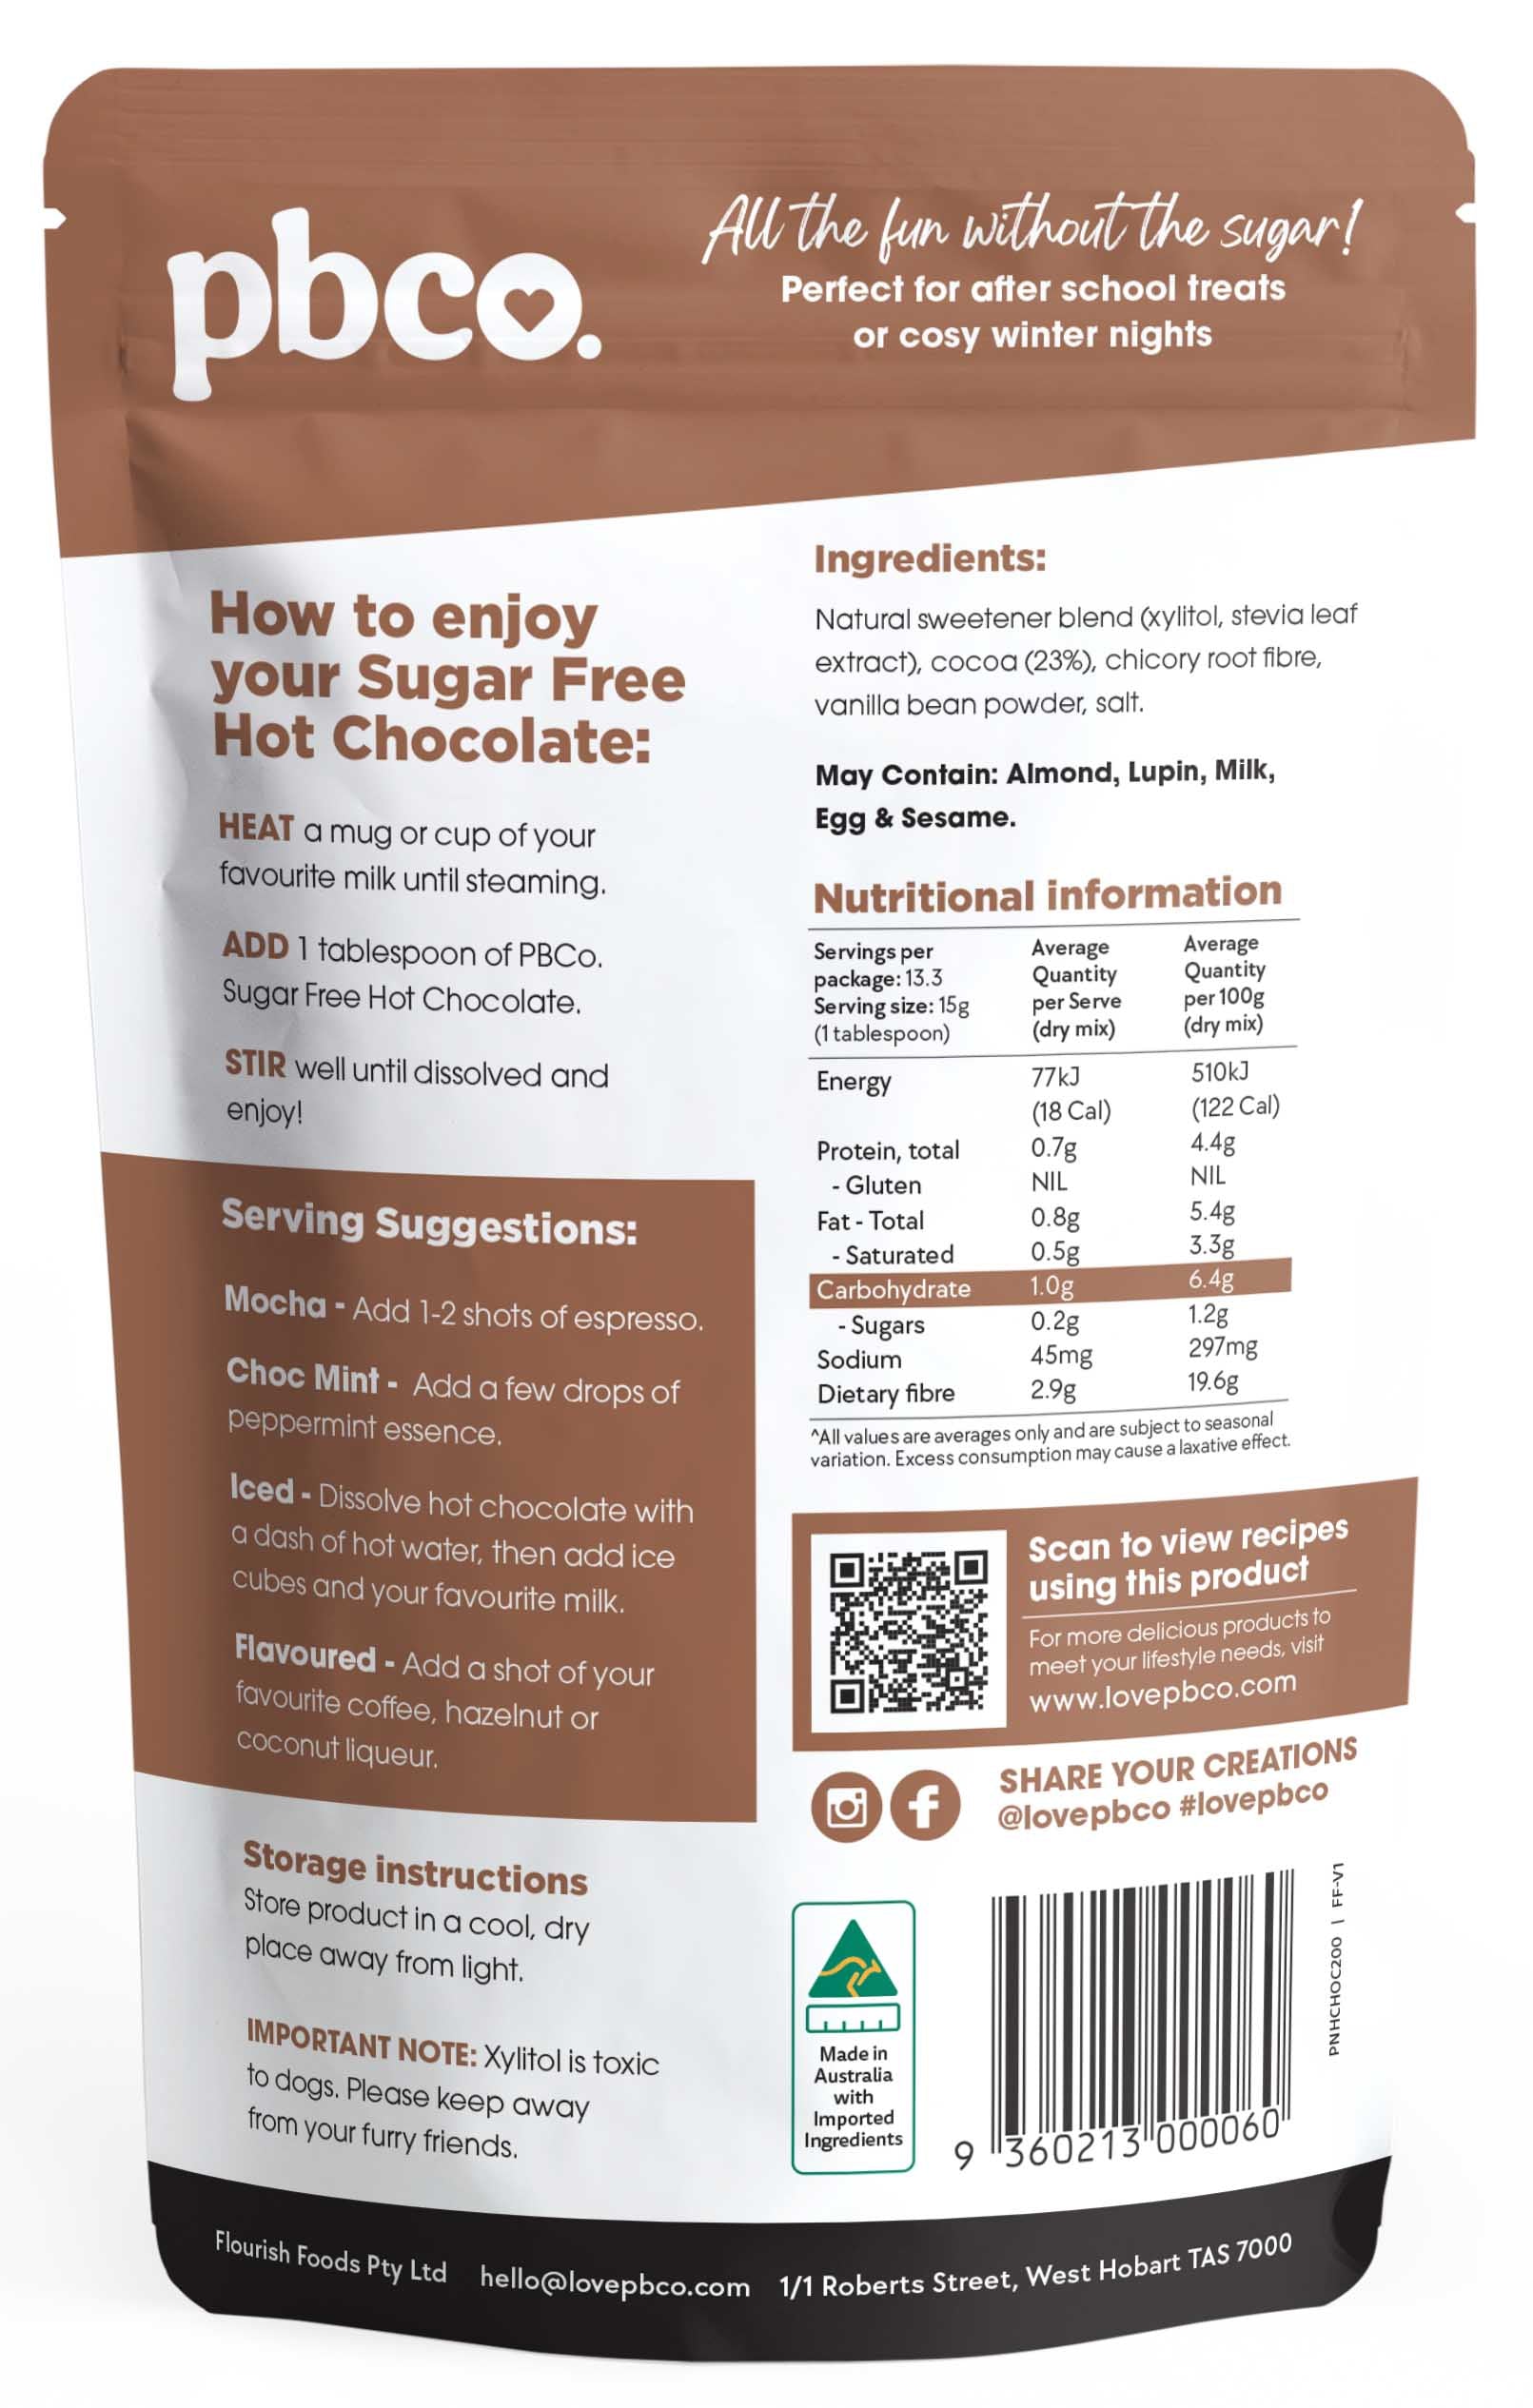 98% Sugar Free Hot Chocolate - 200g - Low carb & sugar free Pantry Staples - Just $7.95! Shop now at PBCo.